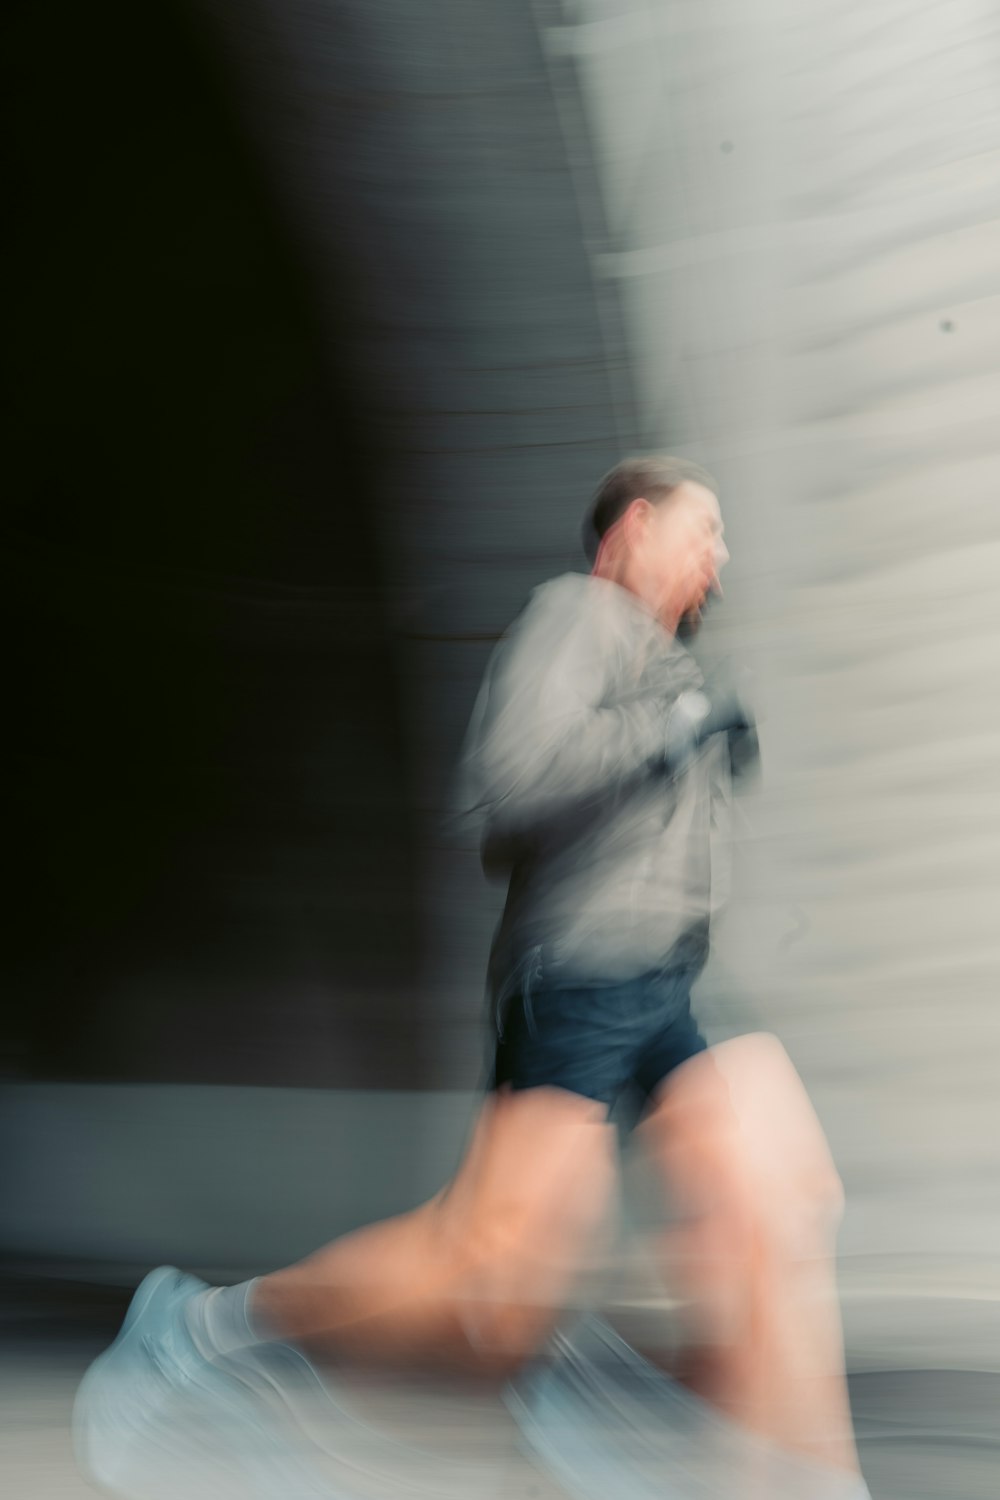 a person running on a track